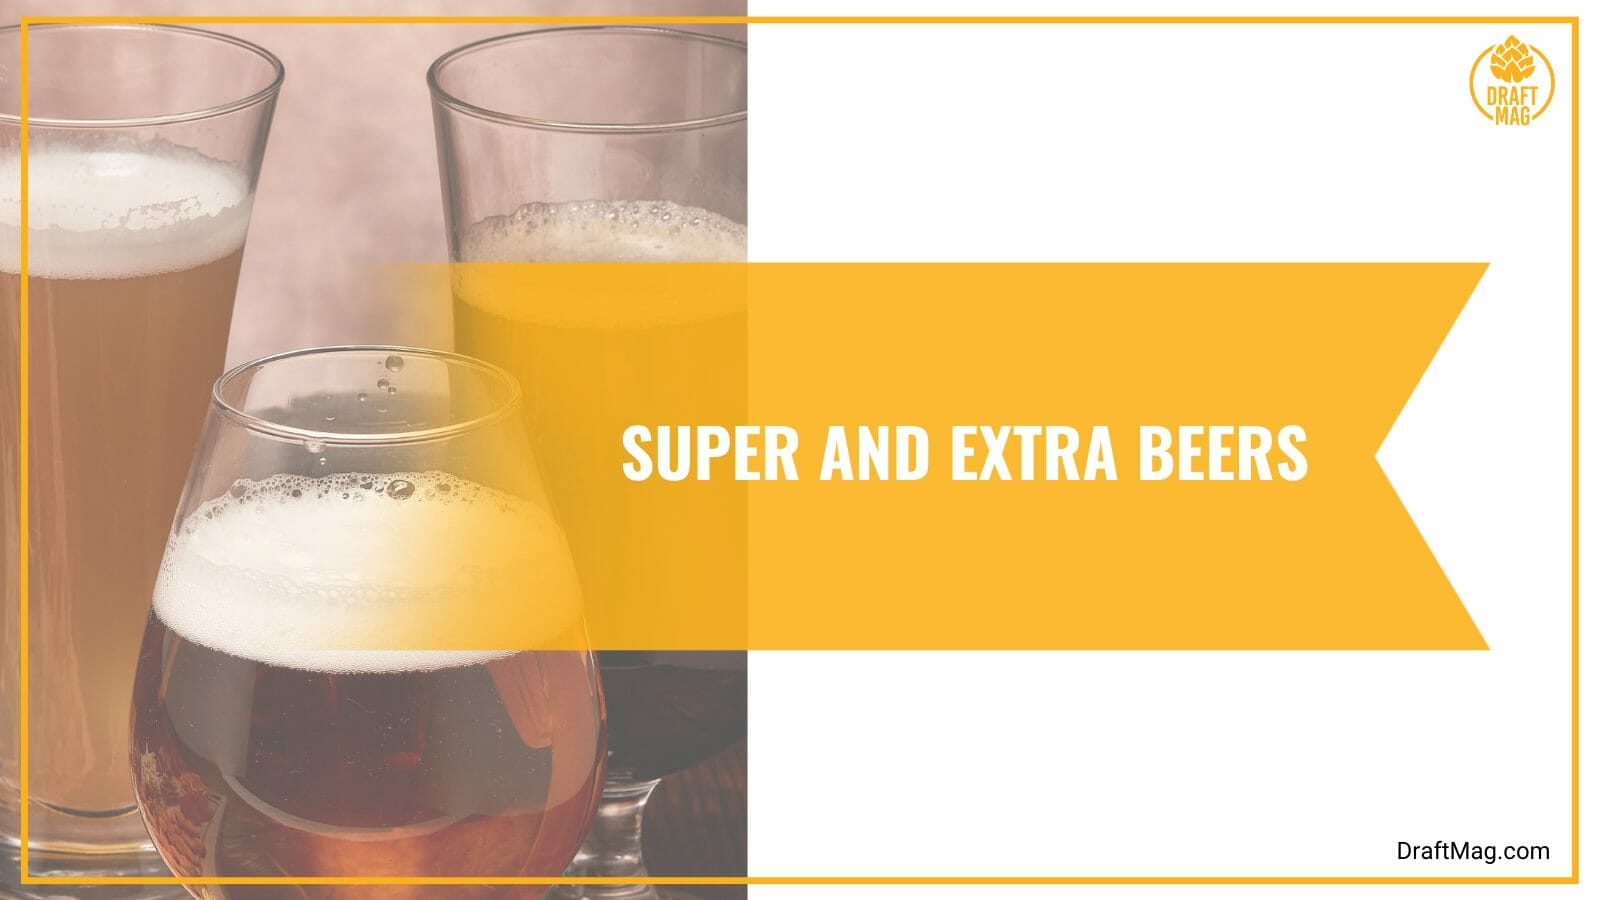 Super and extra dry beers